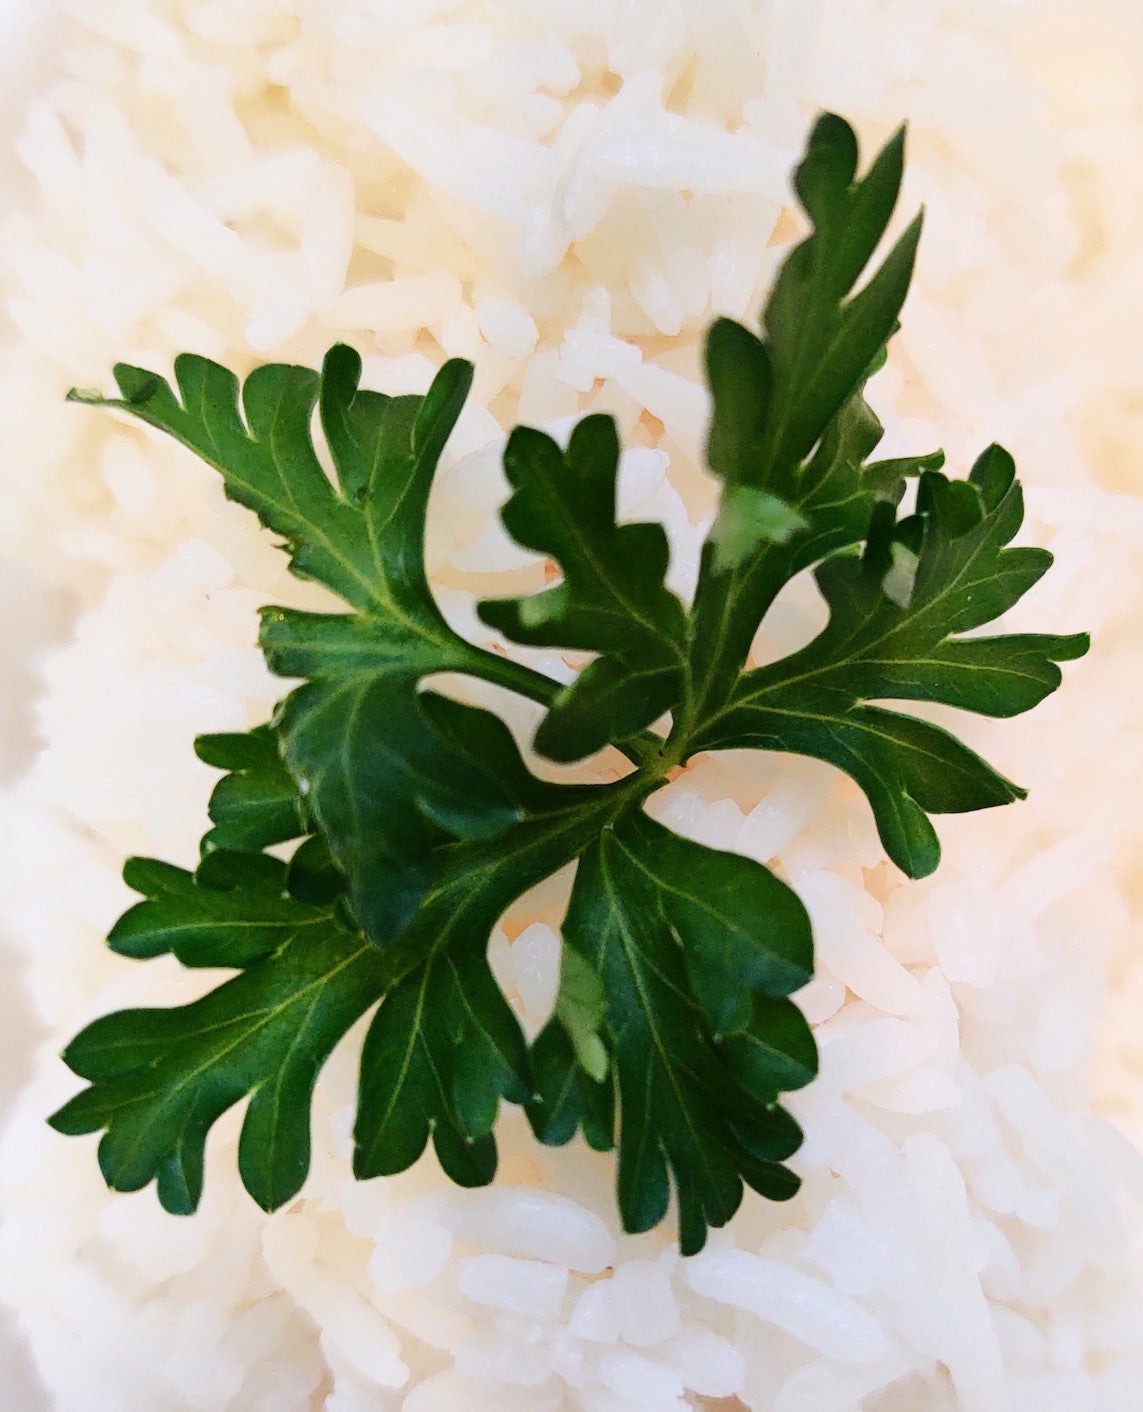 Photograph of a green leafy herb amongst white rice